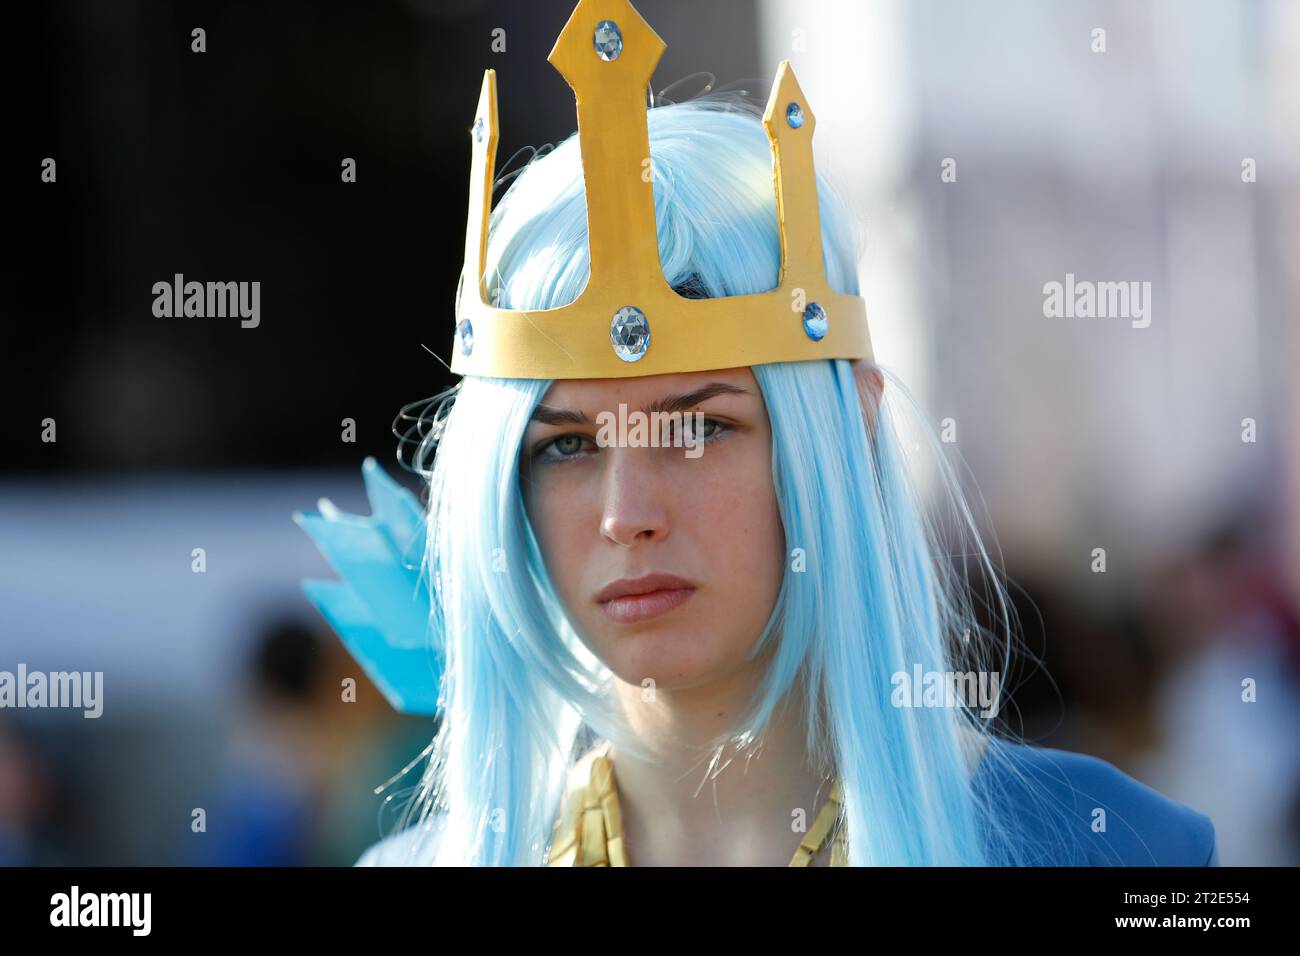 Lucca, Italy - 2018 10 31 : Lucca Comics free cosplay event around city princess. High quality photo Stock Photo